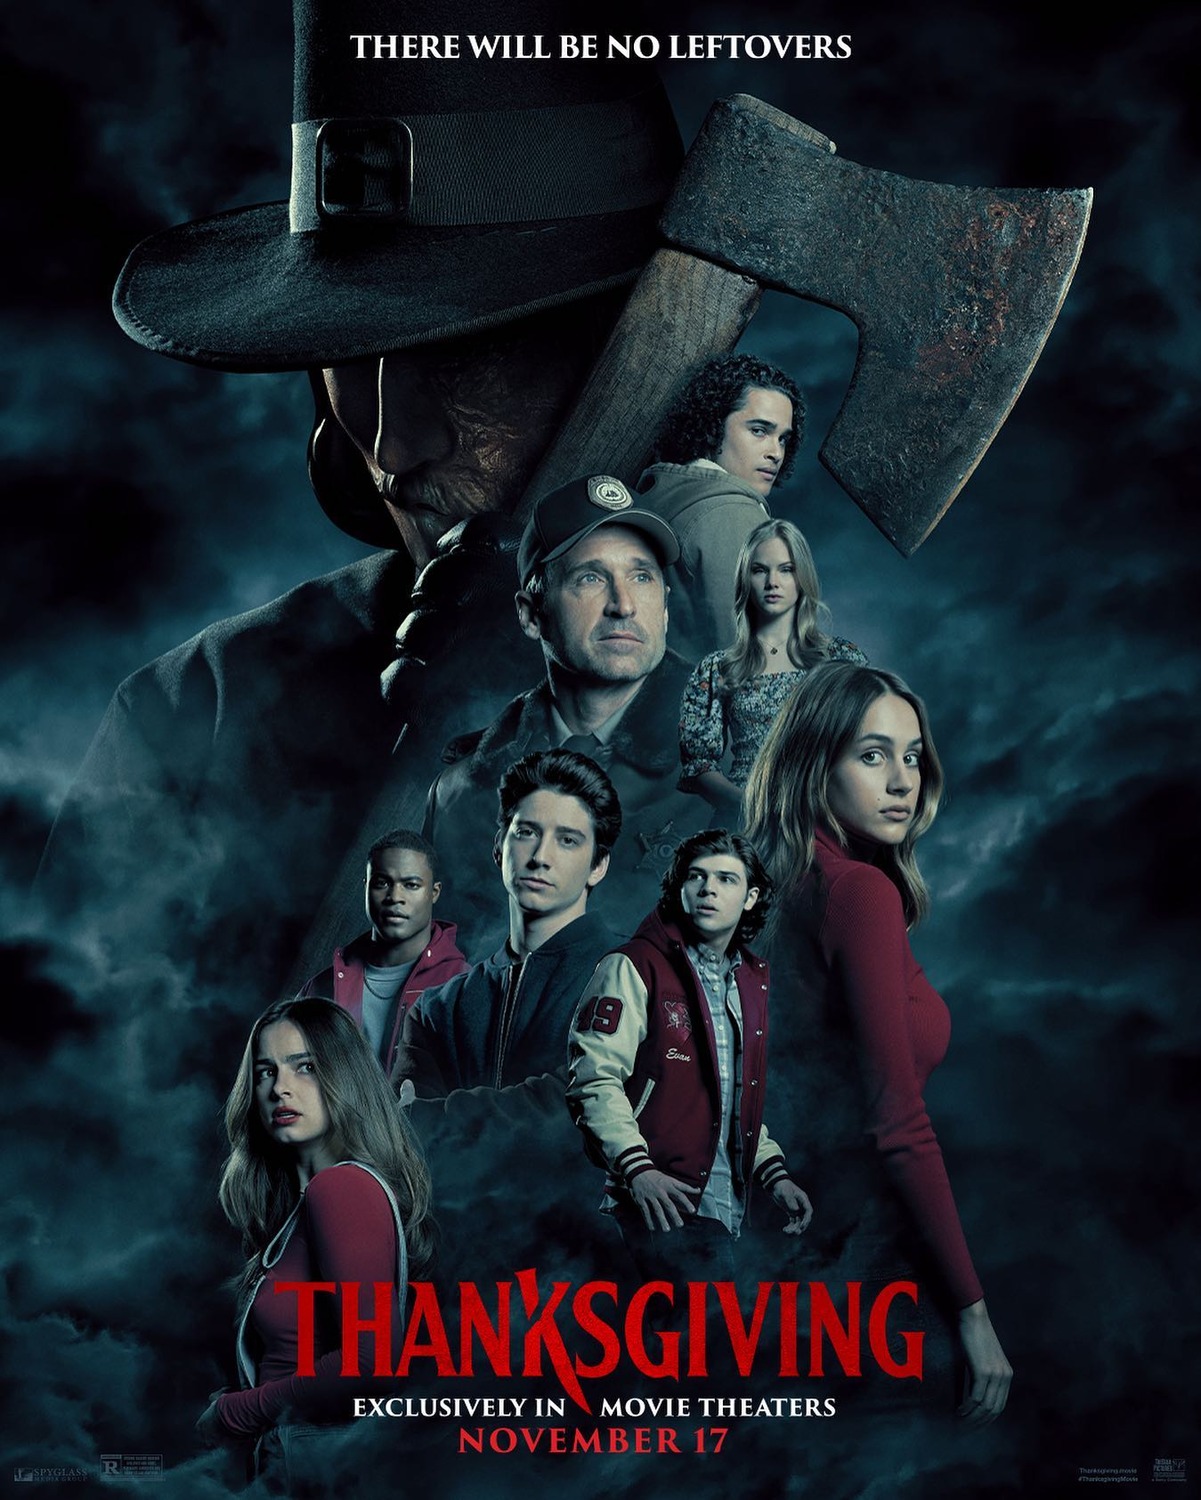 Watch Thanksgiving (2023) online for free in HD Quality on 123Movies!